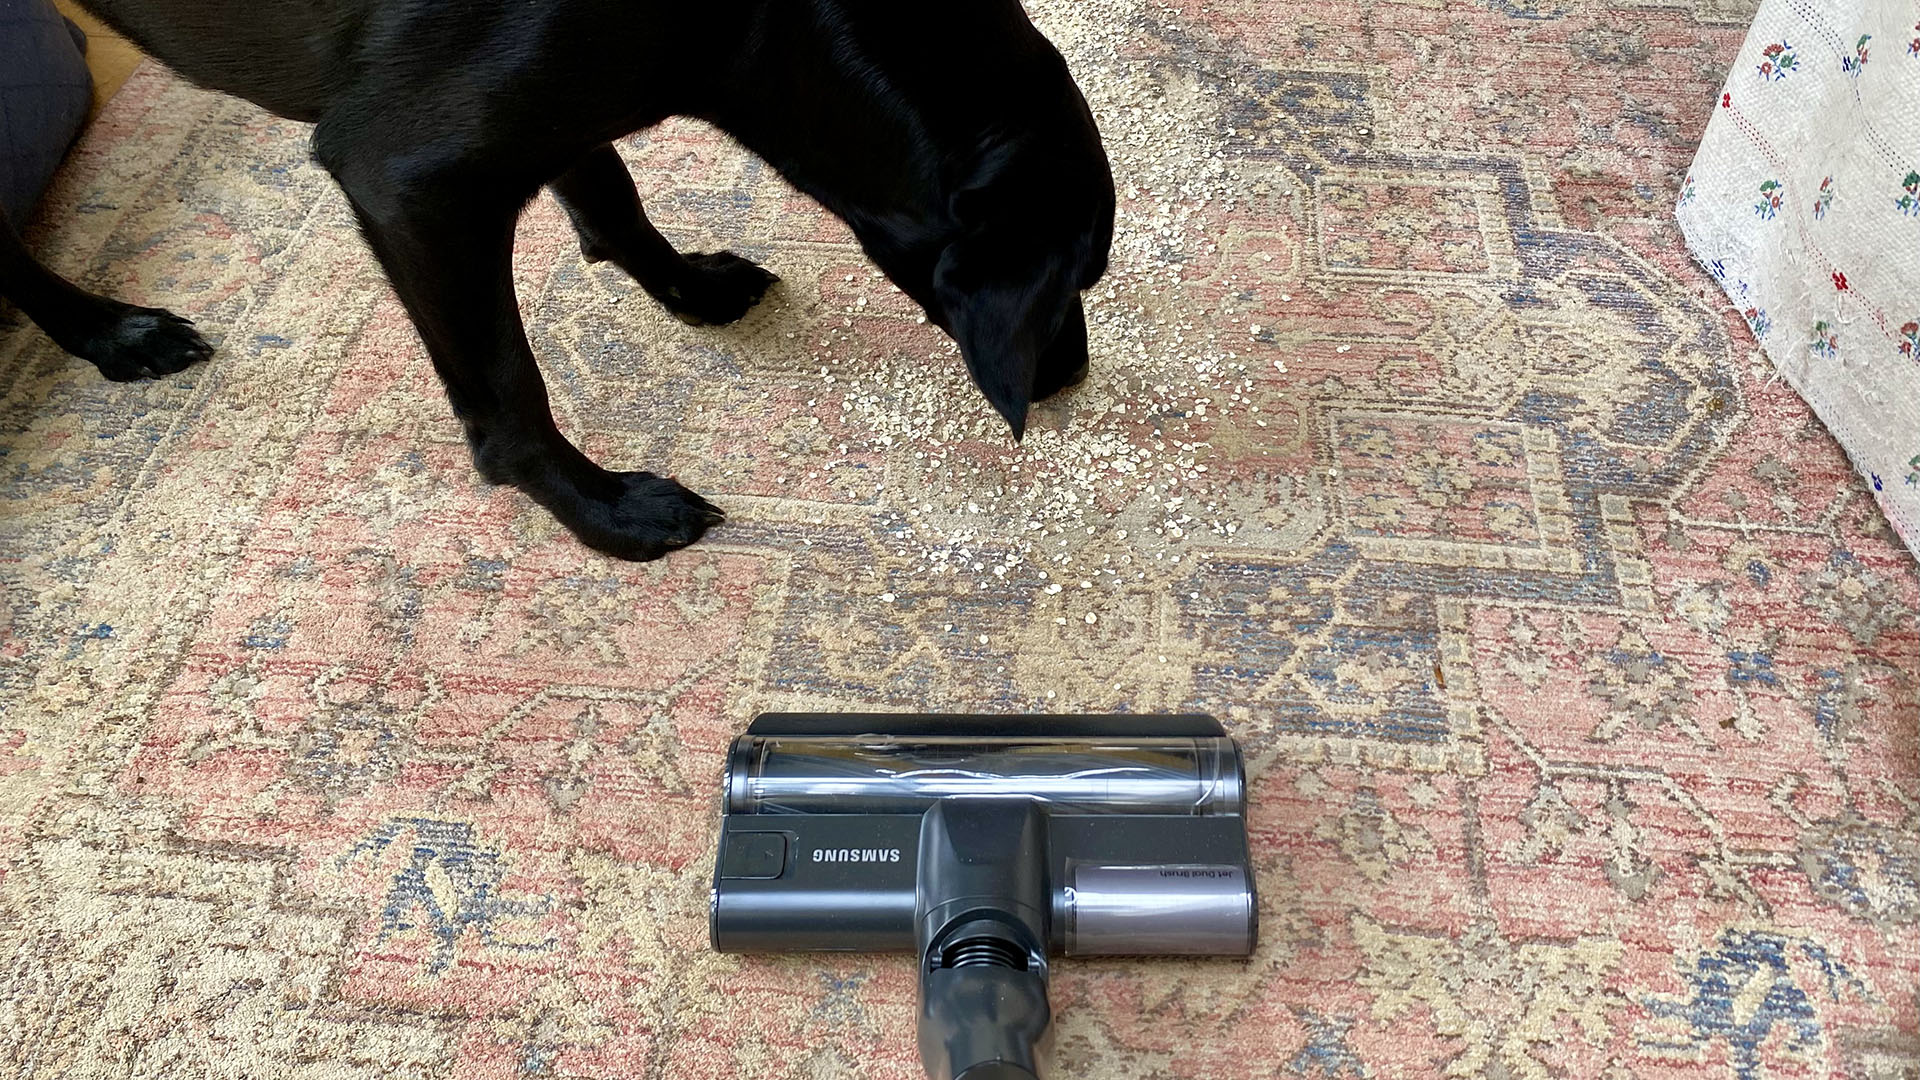 Samsung Jet 85 Pet vacuum cleaner, about to suck up some oats on a rug